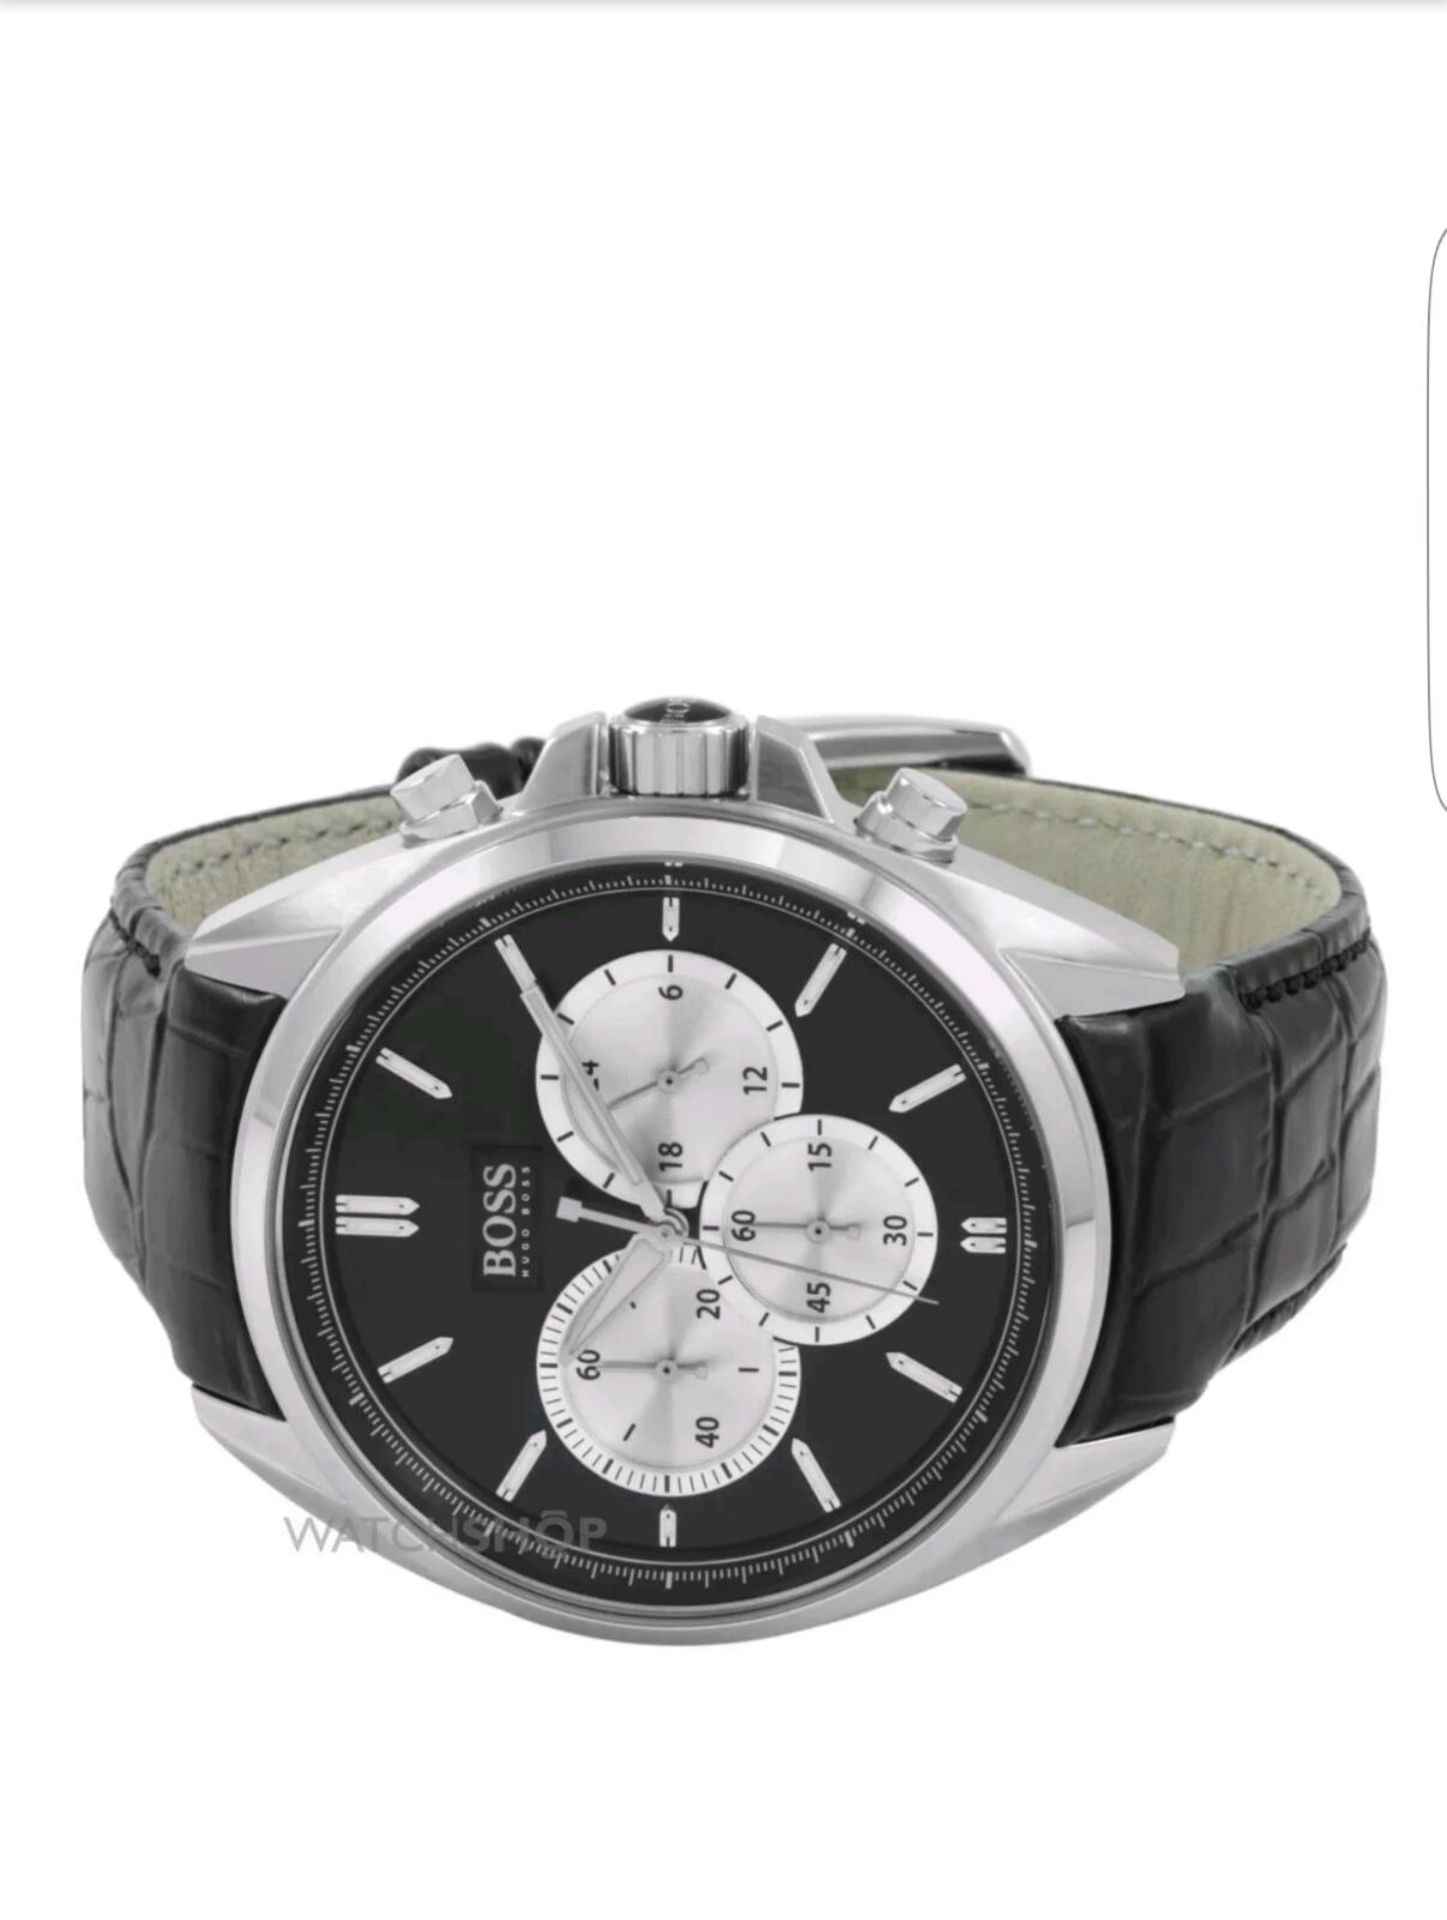 BRAND NEW GENTS HUGO BOSS WATCH 1512879, COMPLETE WITH ORIGINAL PACKAGING AND MANUAL - FREE P & P - Image 2 of 2